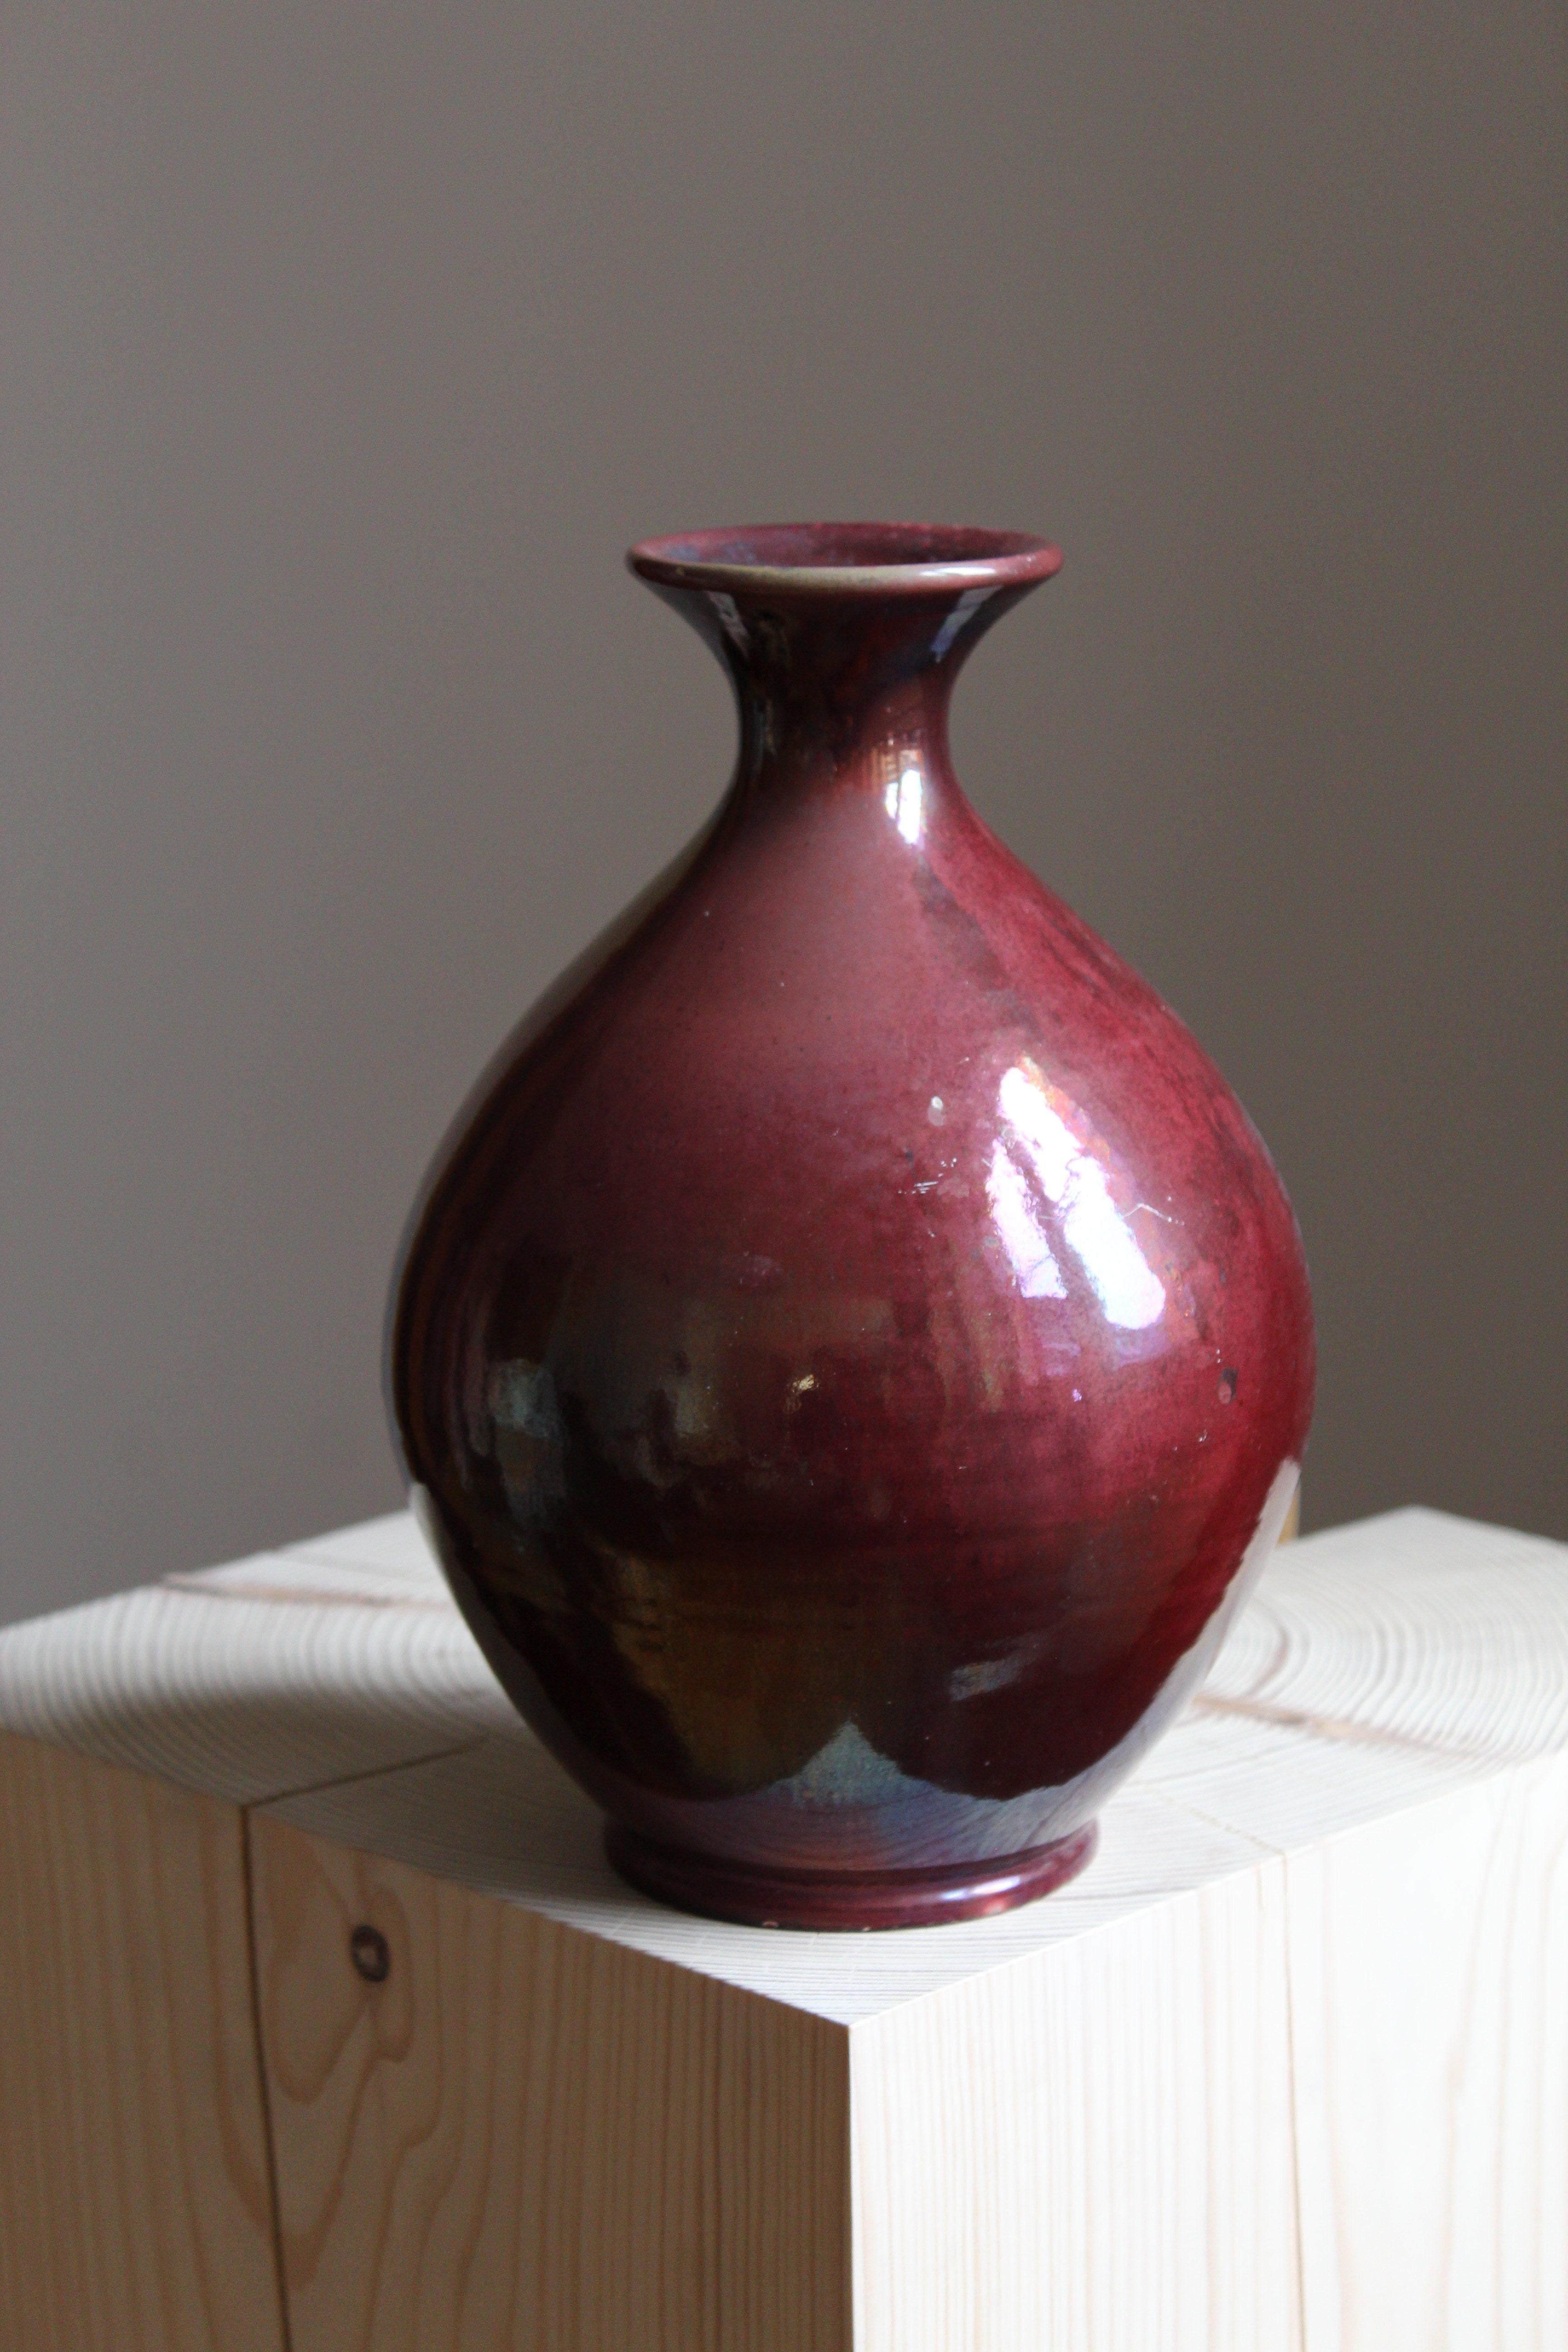 A sizable vase. Designed and produced by Herman Kähler. Signed HAK. 

As is Kählers signature, the clay was sourced on the island of Bornholm. On this vase, a highly complex and artistic oxblood glaze has been applied.

Kähler is an important